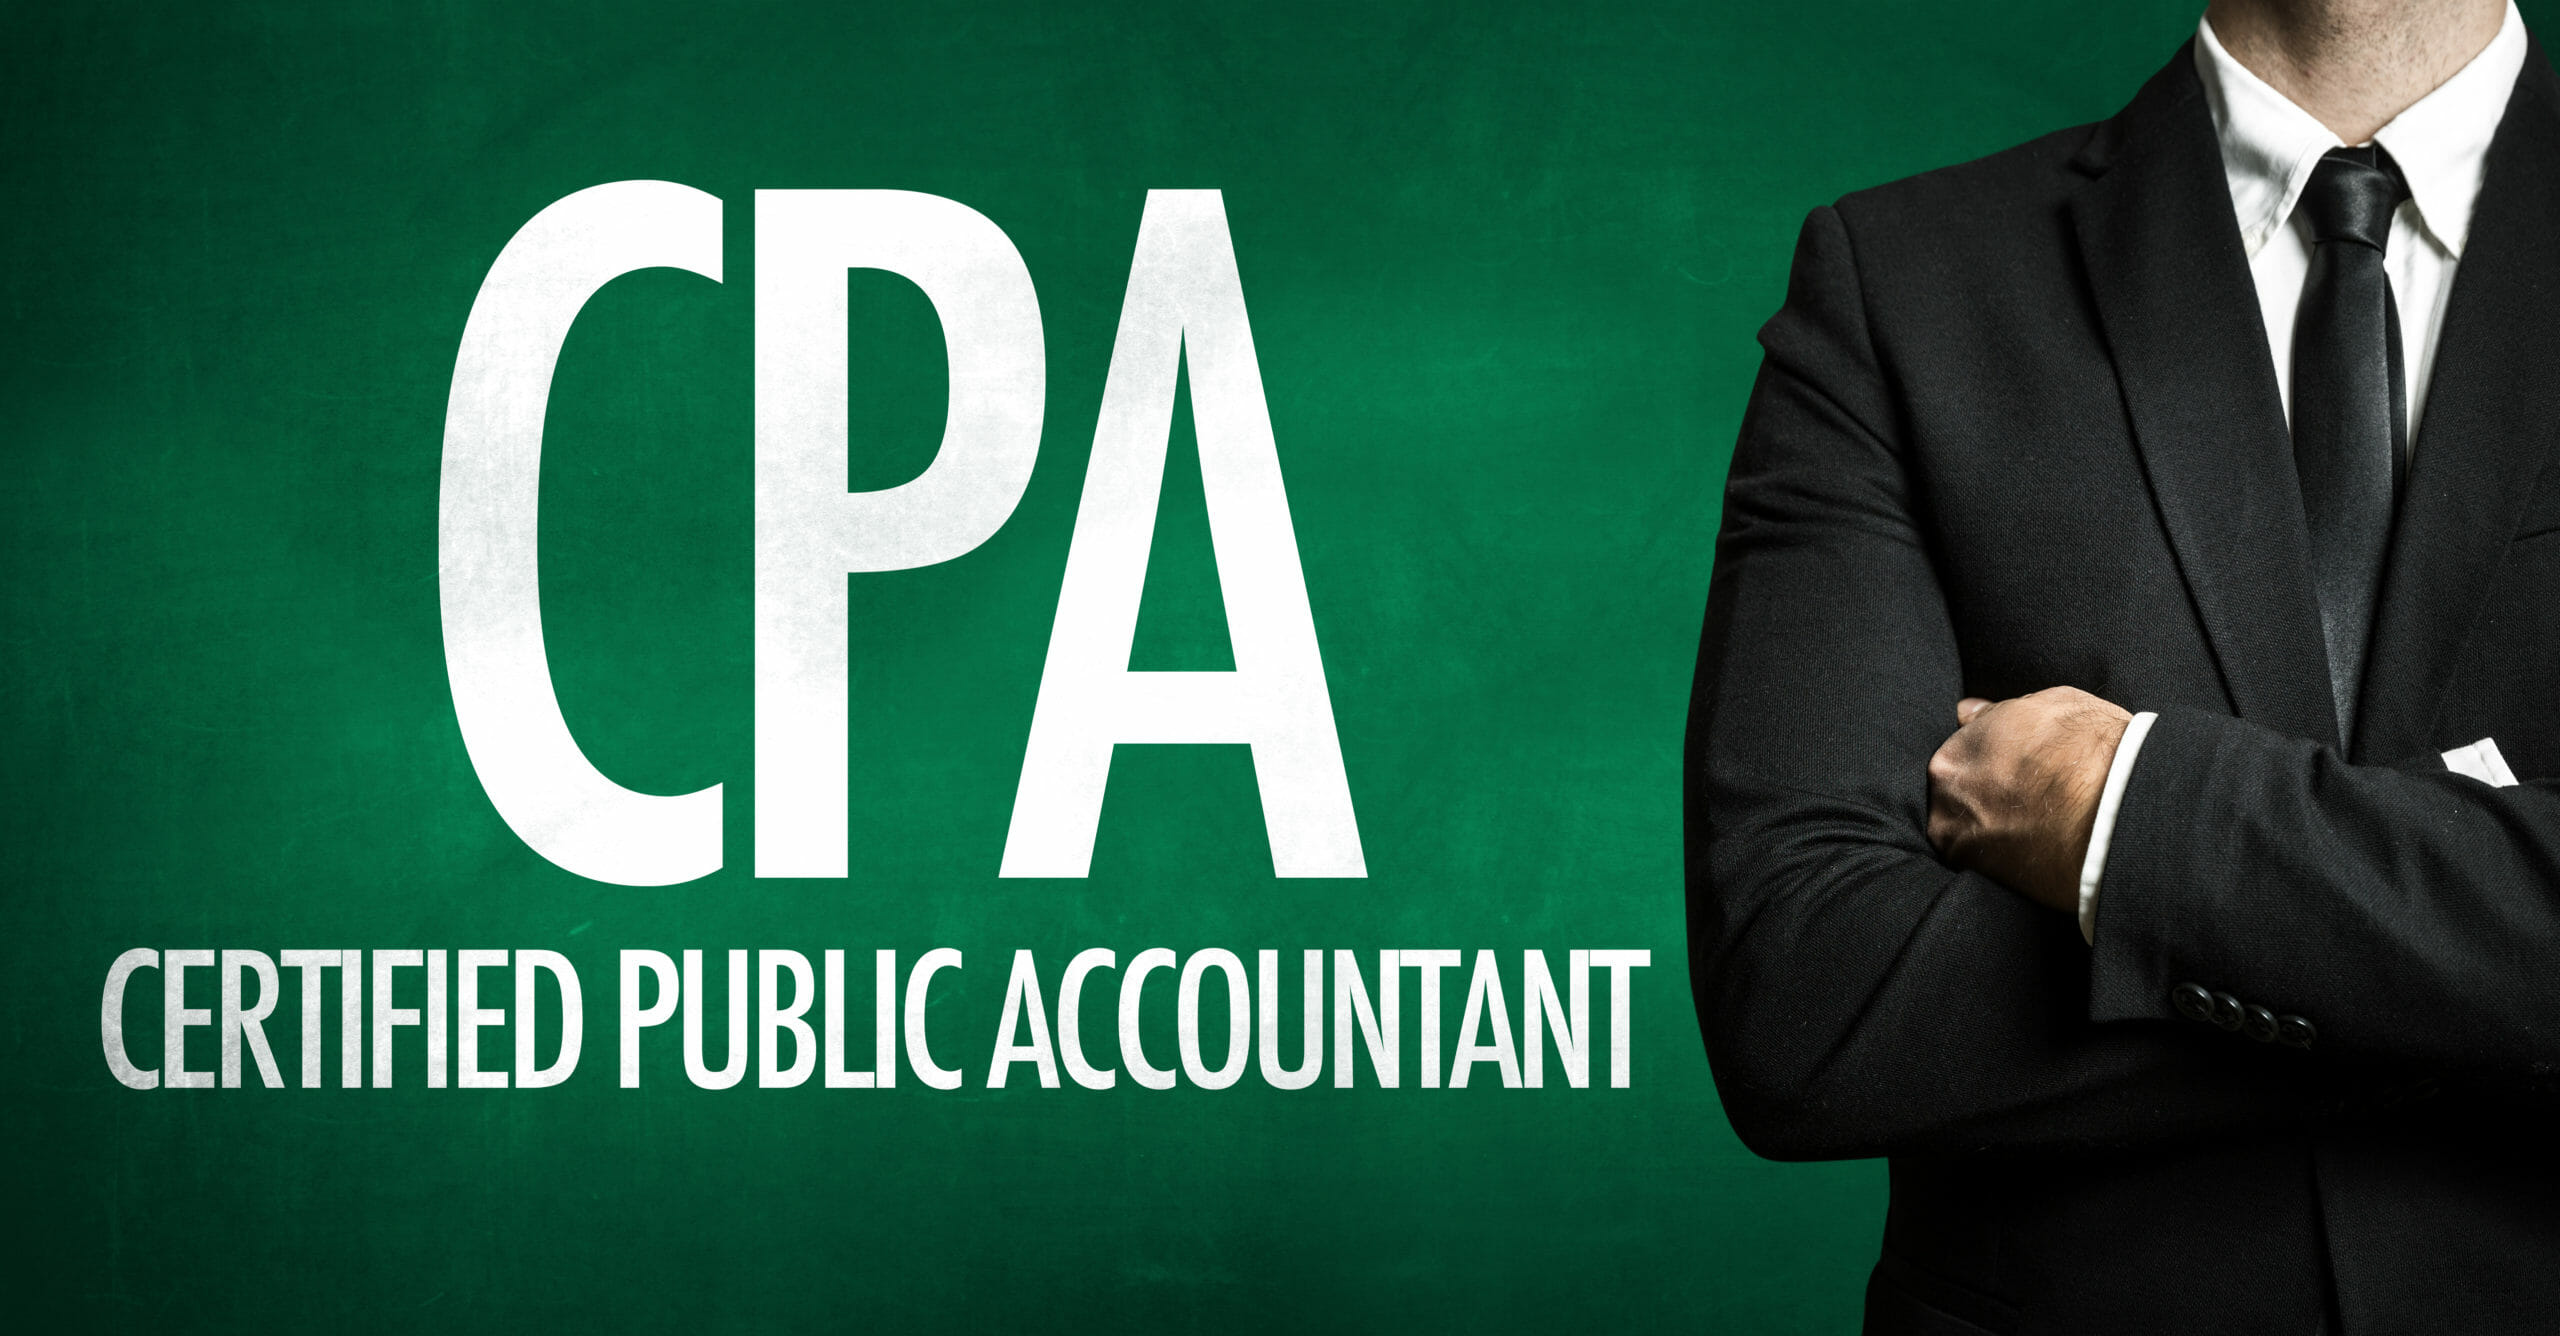 Five reasons to hire a CPA to do your taxes